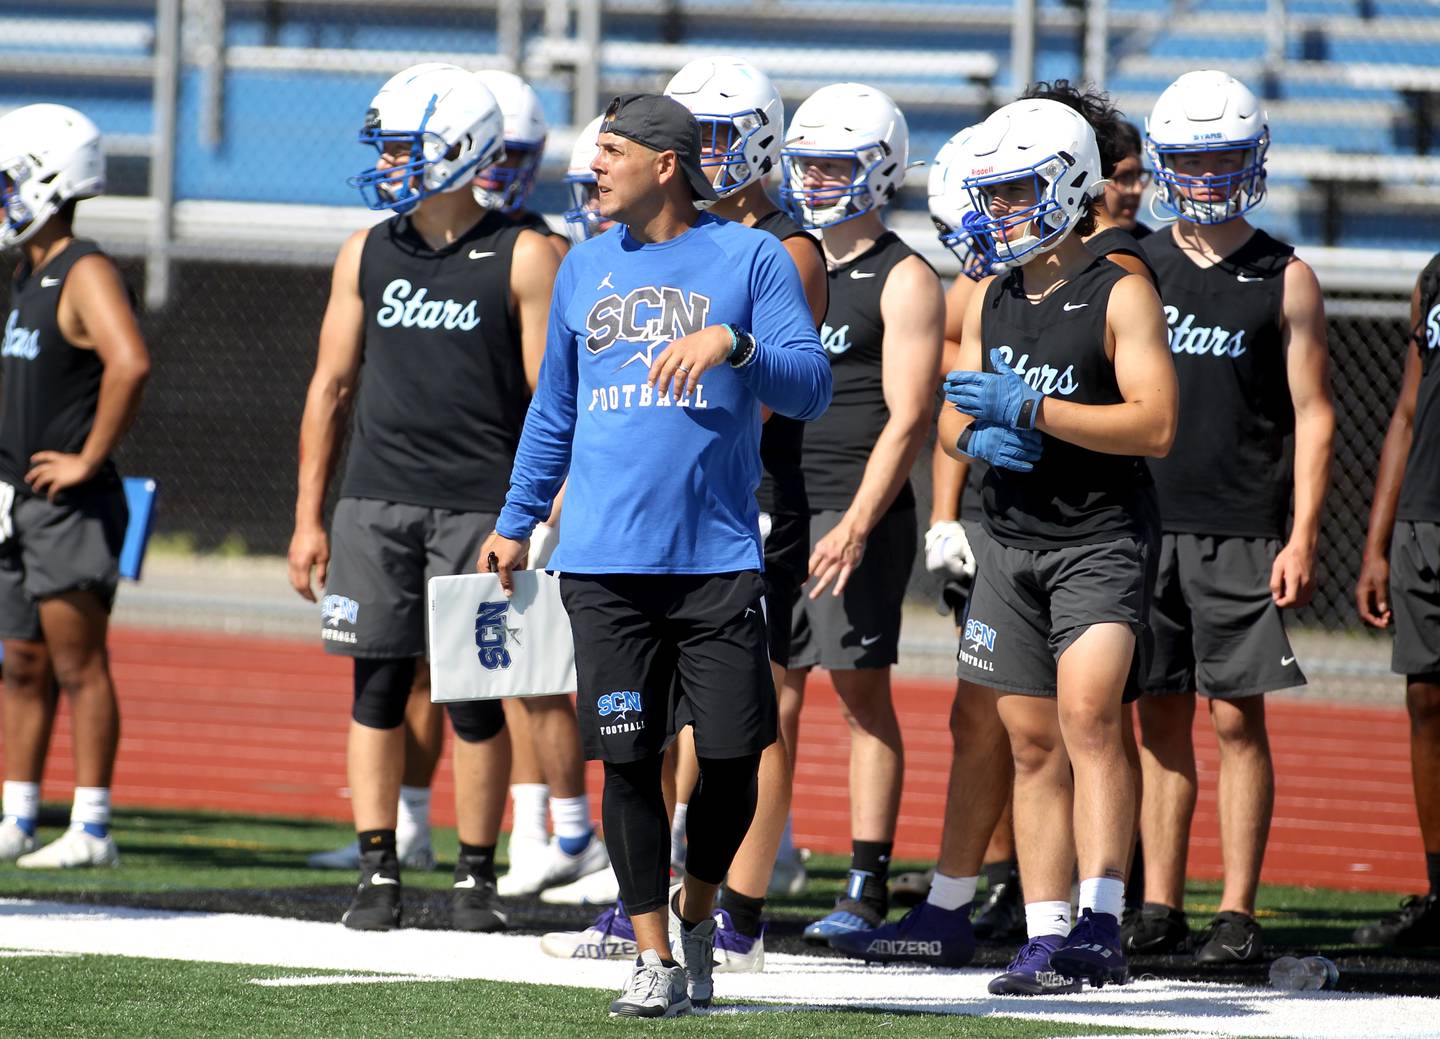 St. Charles North Head Coach Rob Pomazak walks the sideline during a 7 on 7 tournament at St. Charles North High School on Thursday, June 30, 2022.